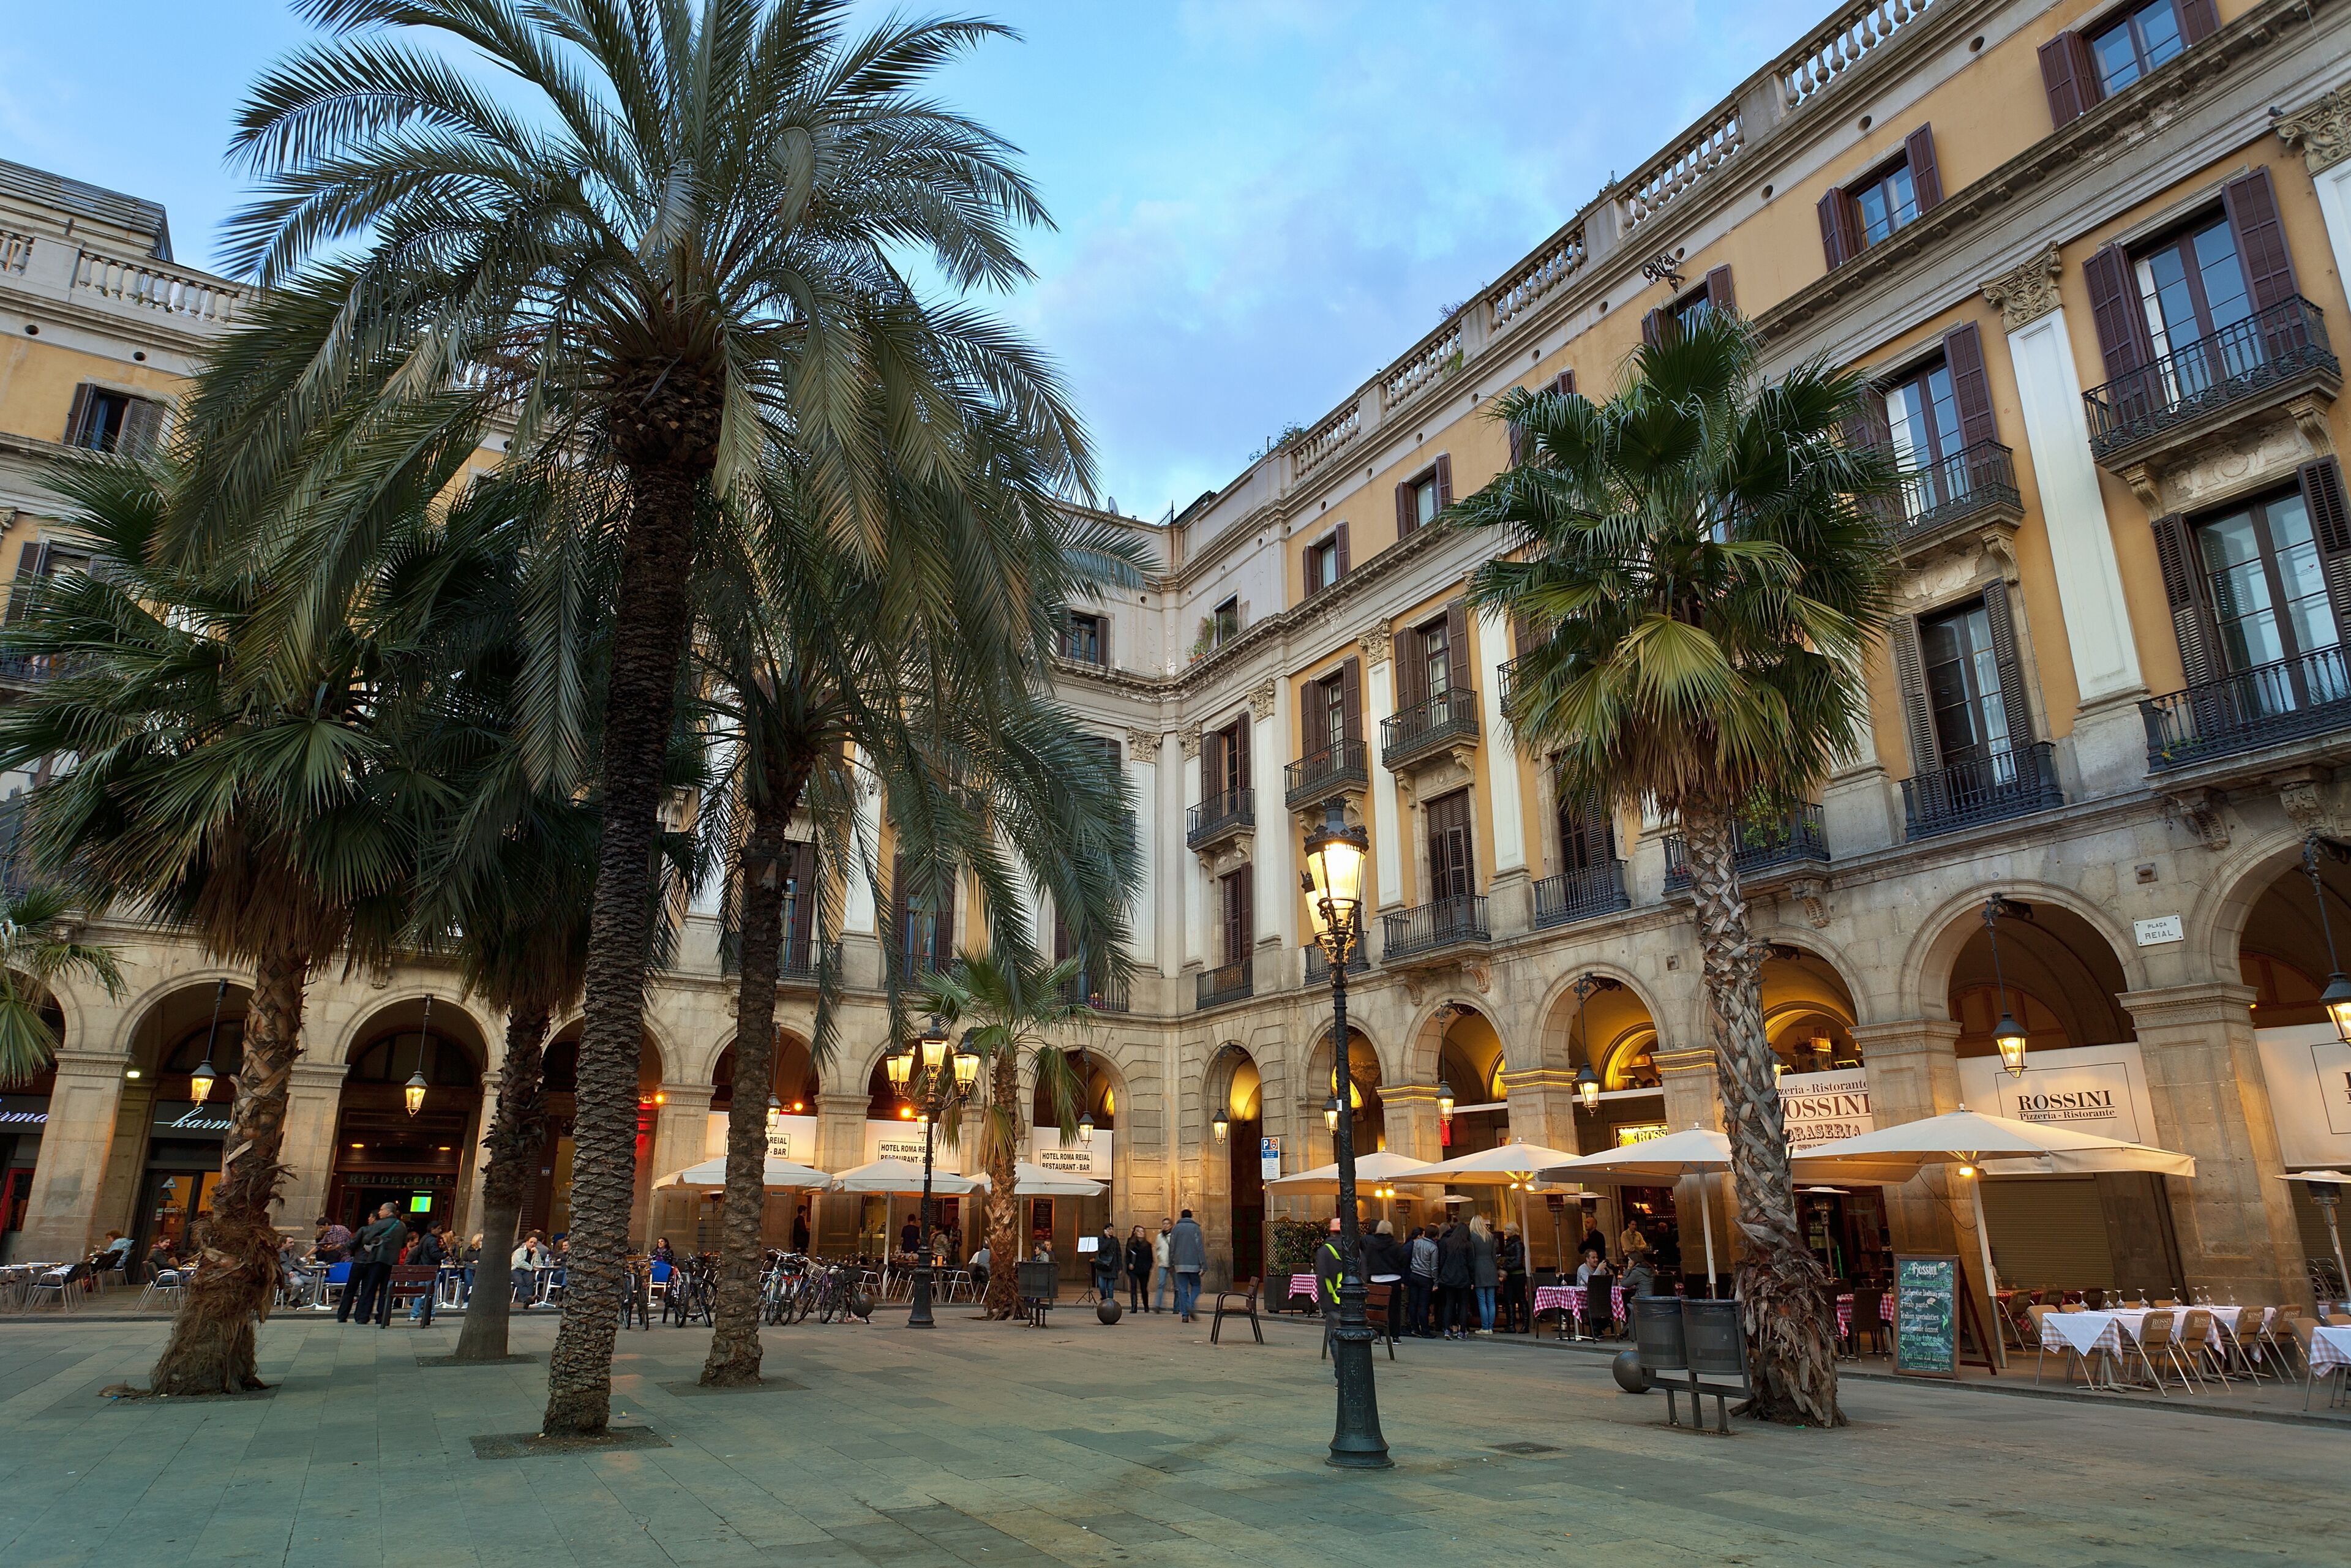 A bustling Mediterranean plaza with palm trees, outdoor cafes, and classic architecture at twilight, evoking a sense of relaxed urban life.